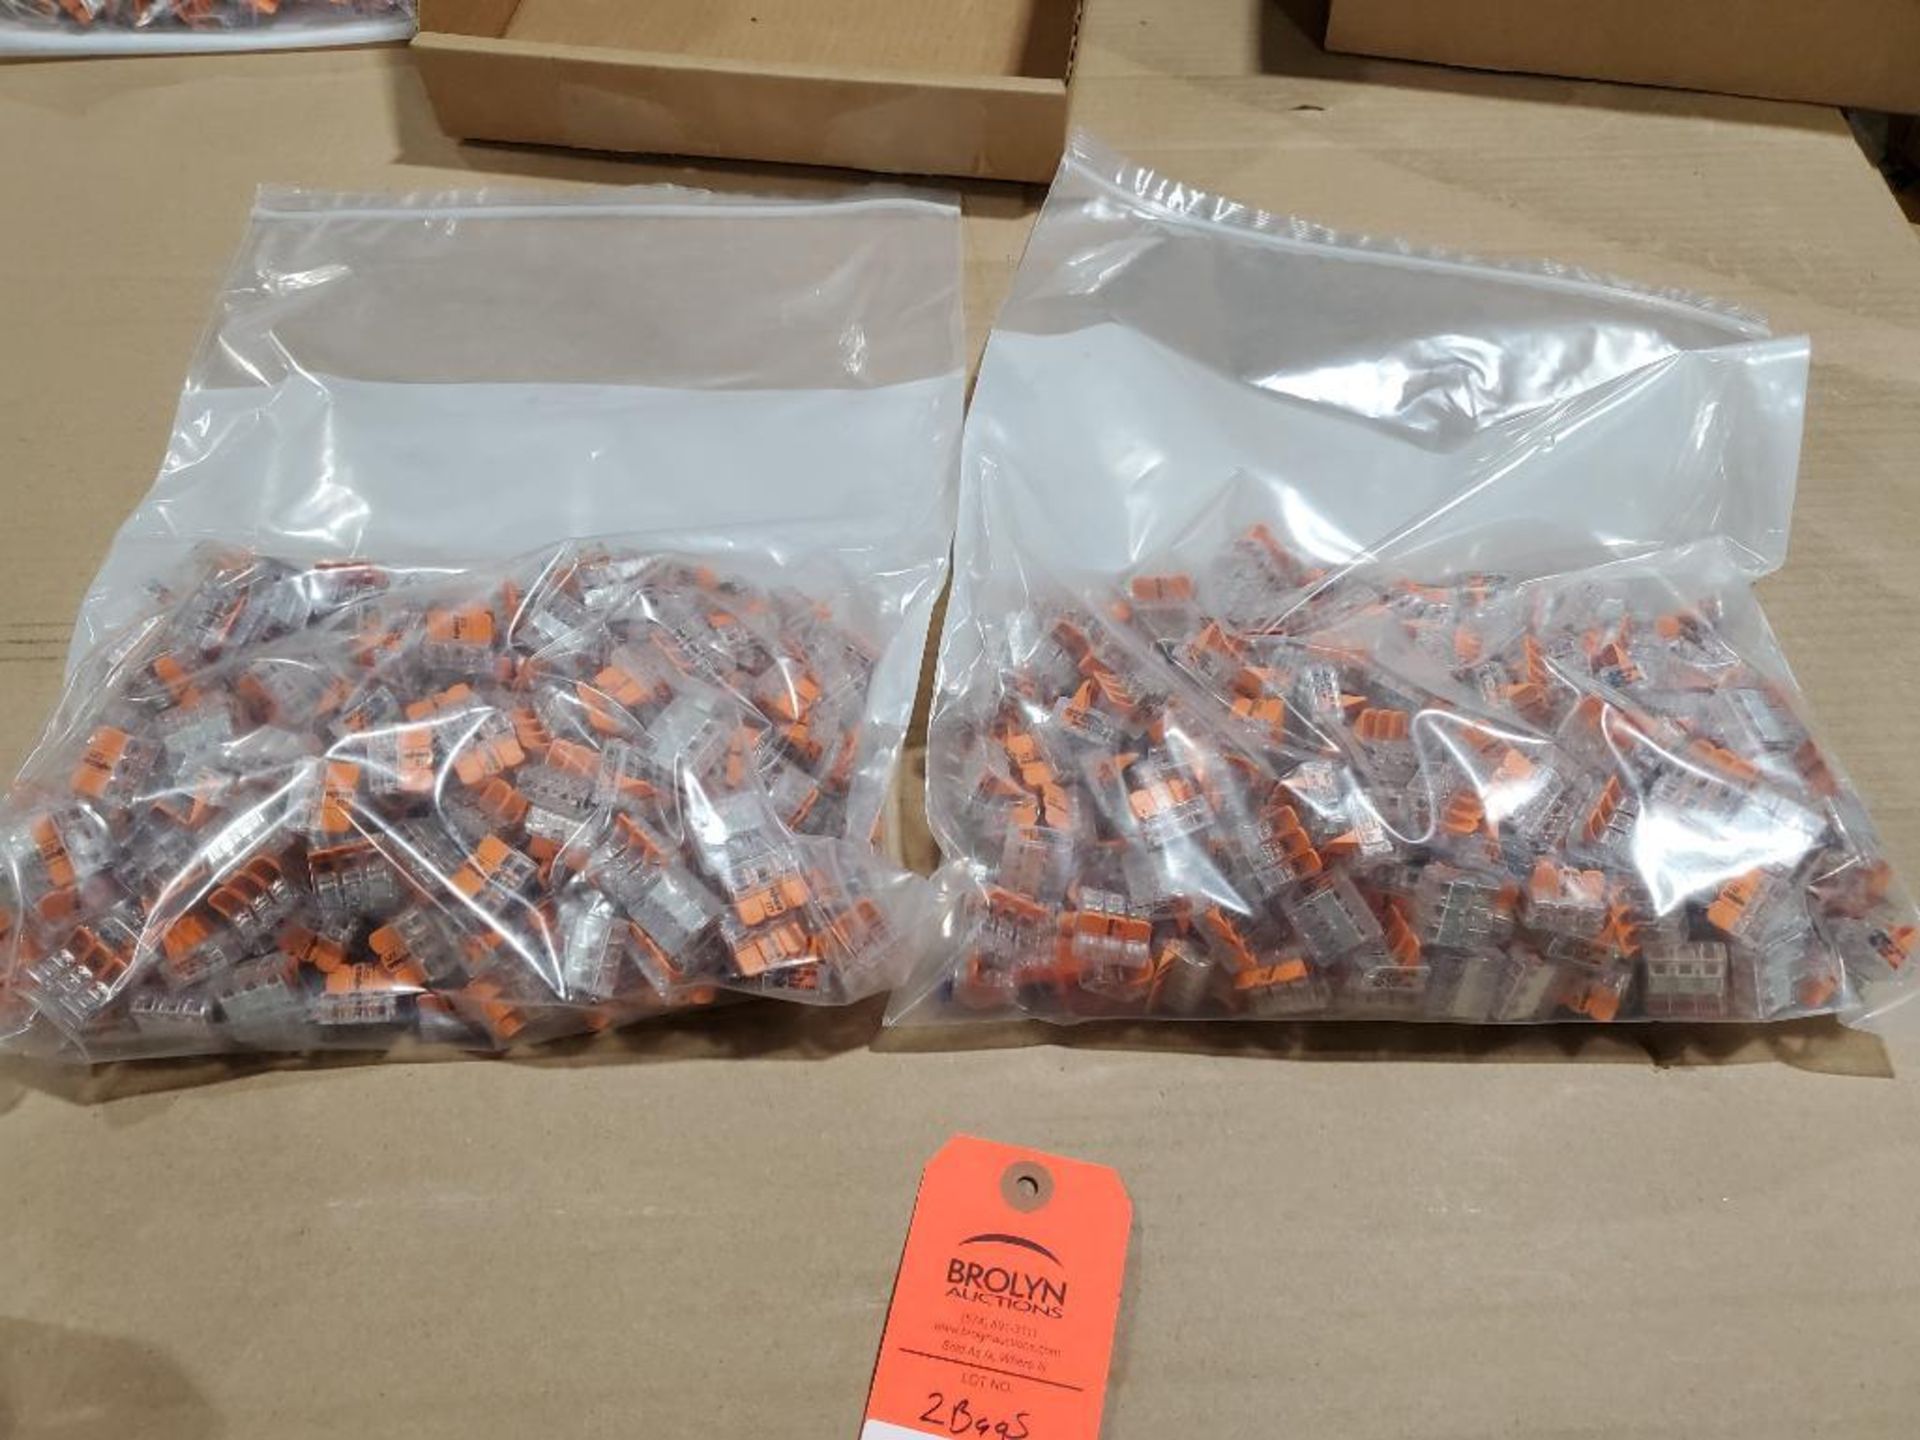 Qty 2 bags of Assorted Wago 221 series lever nut.